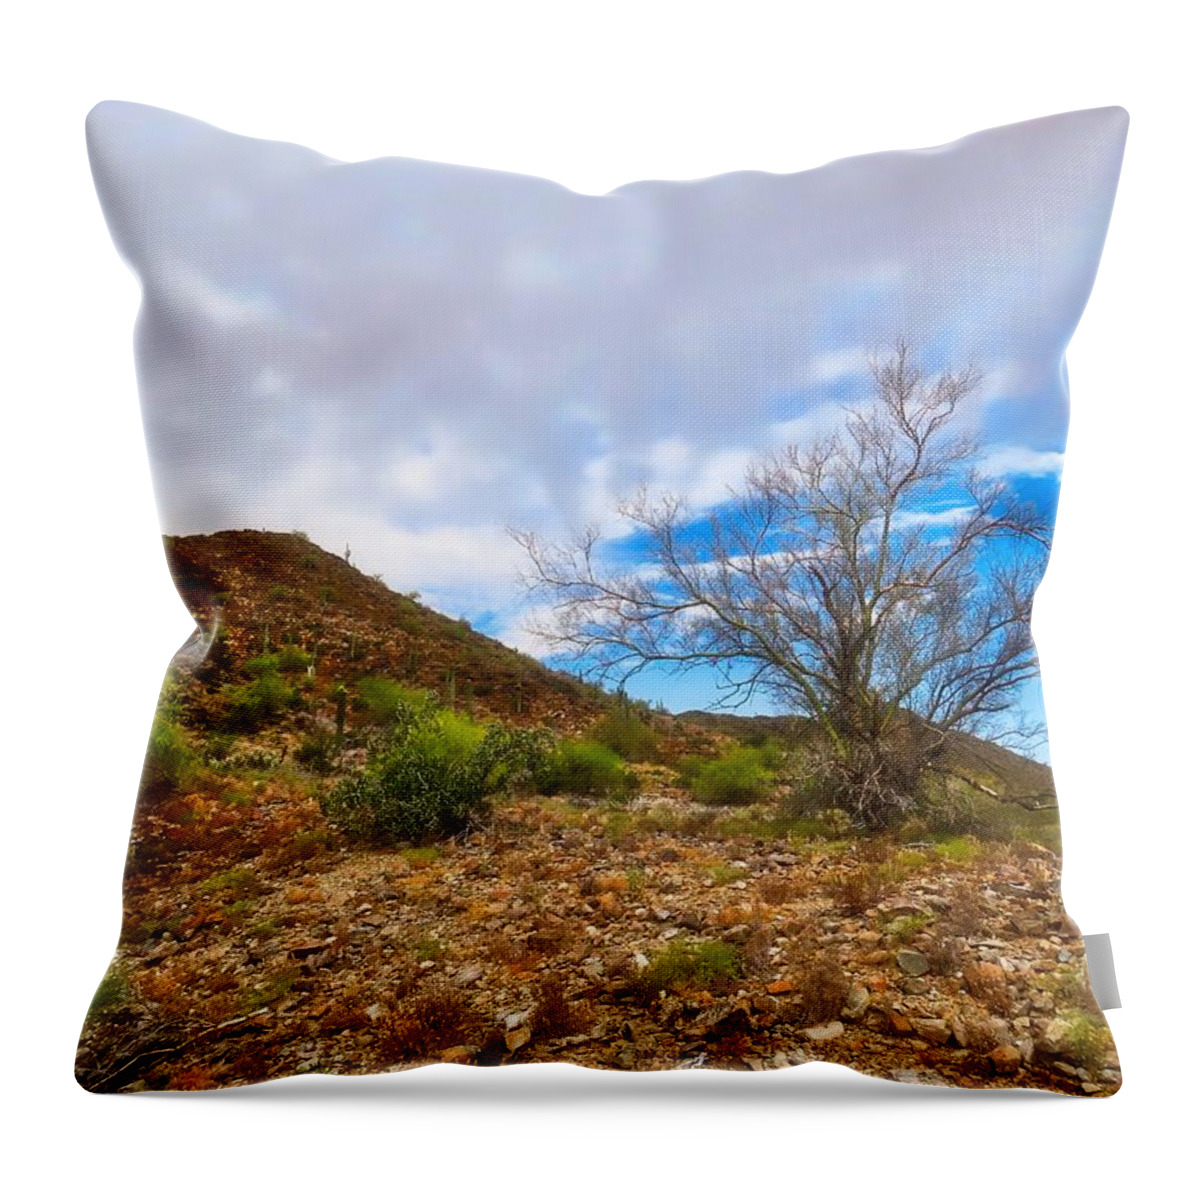 Arizona Throw Pillow featuring the photograph Lone Palo Verde by Judy Kennedy